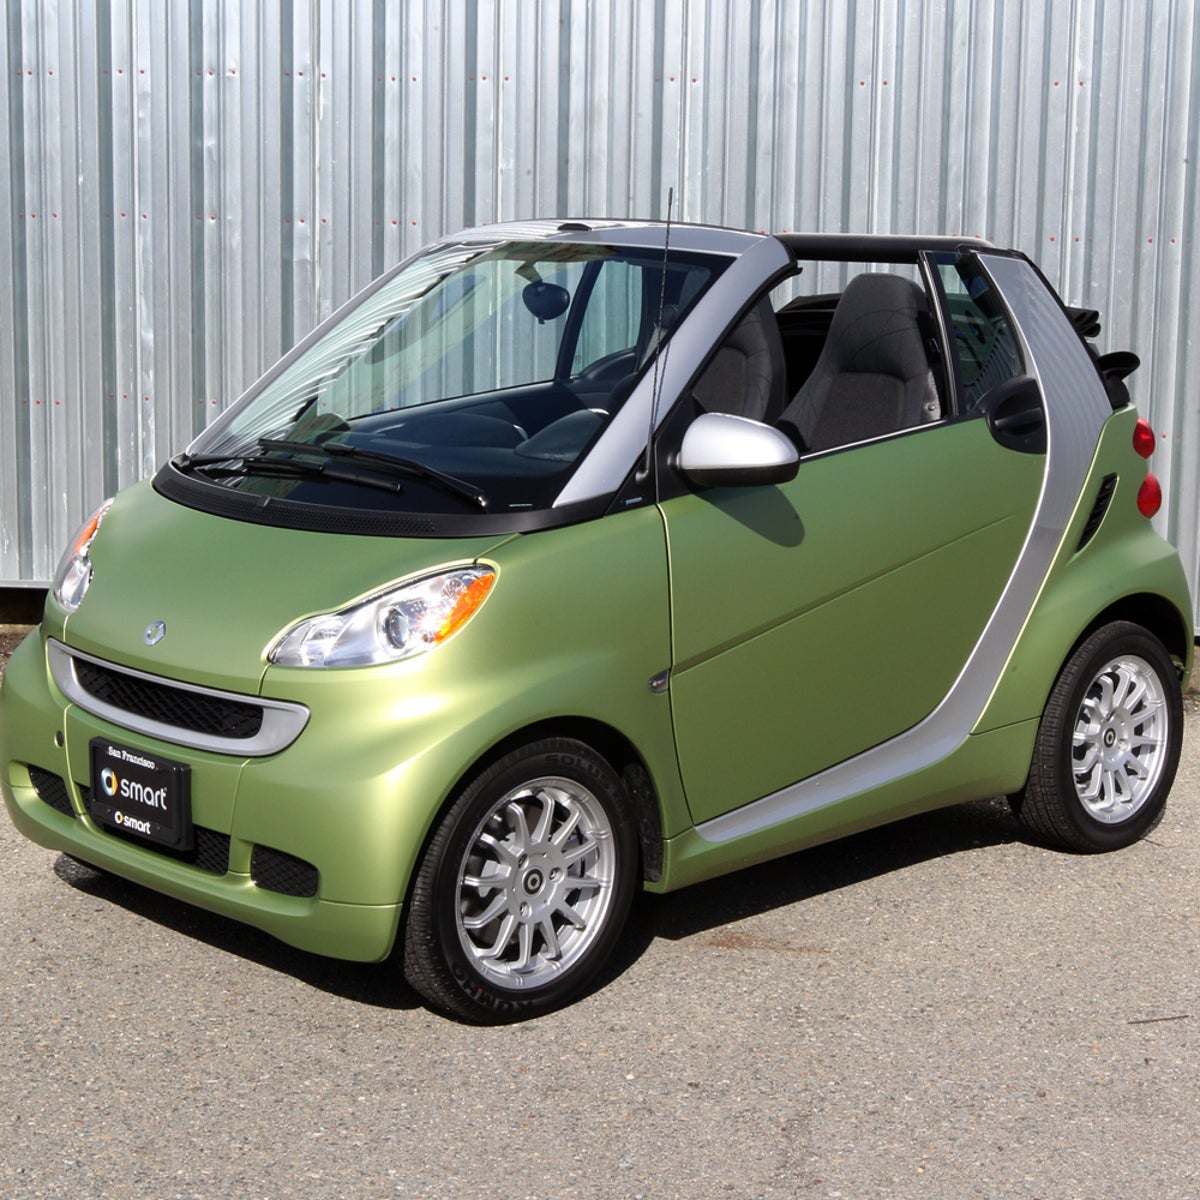 2011 Smart ForTwo Cabriolet review: 2011 Smart ForTwo Cabriolet - CNET